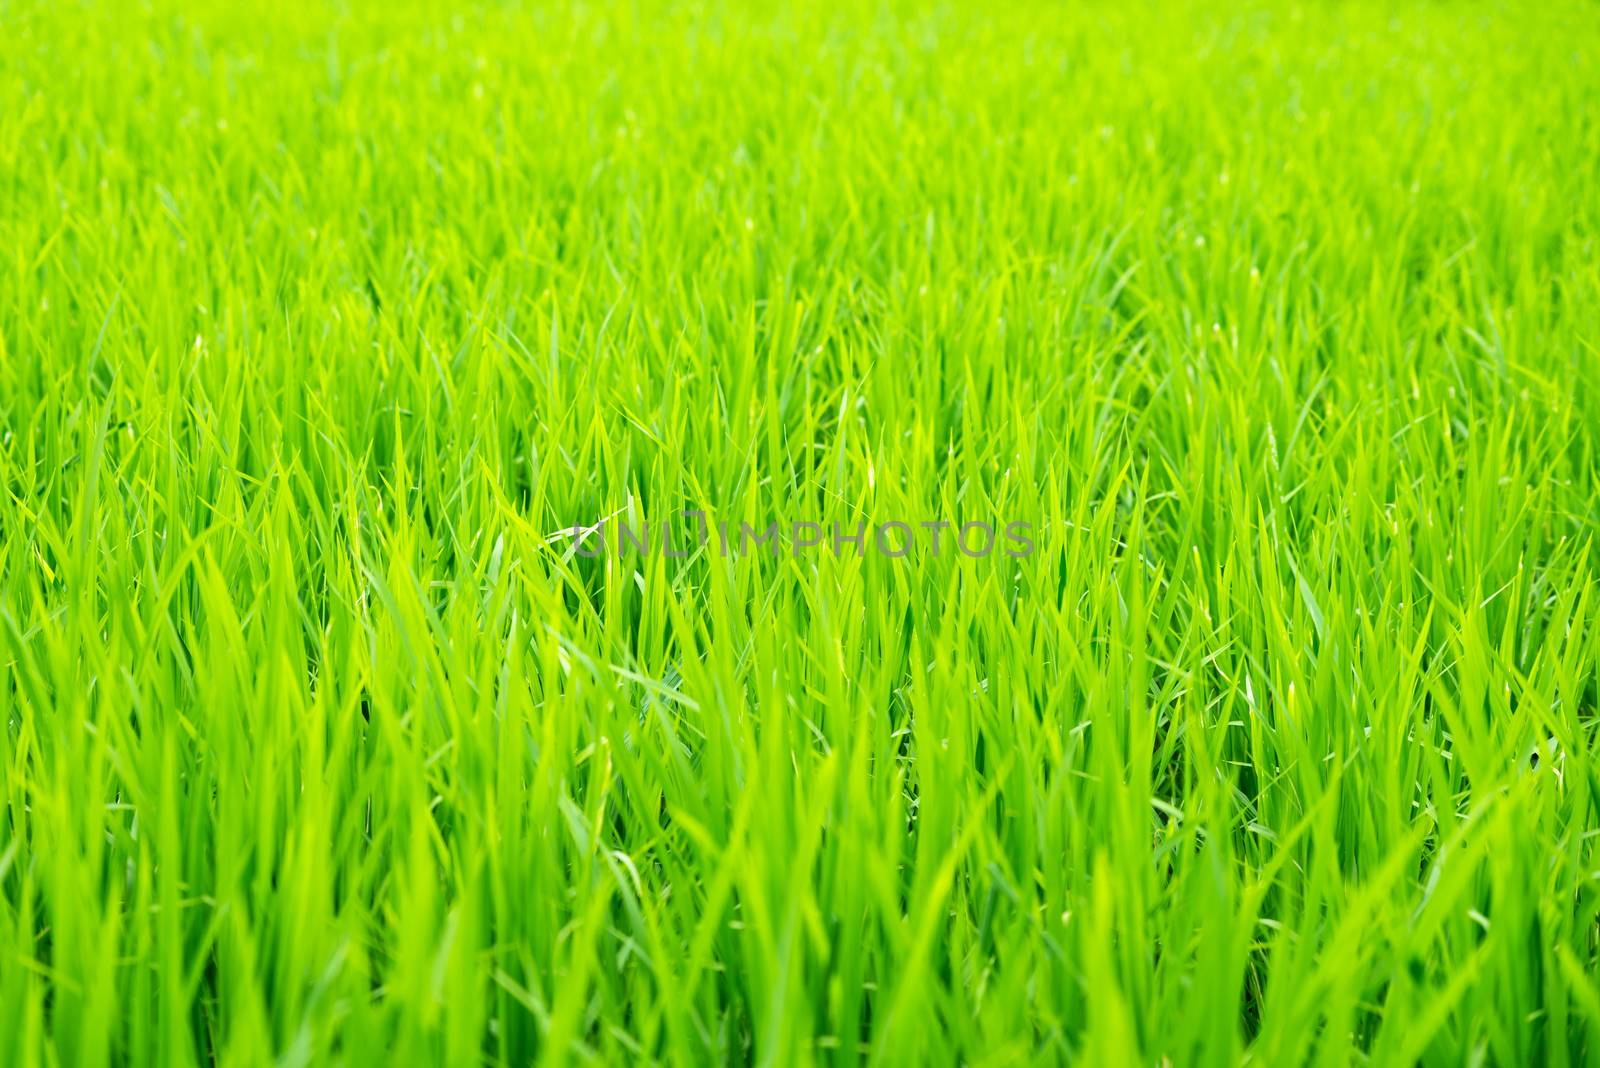 Detail of rice field, young rice growing